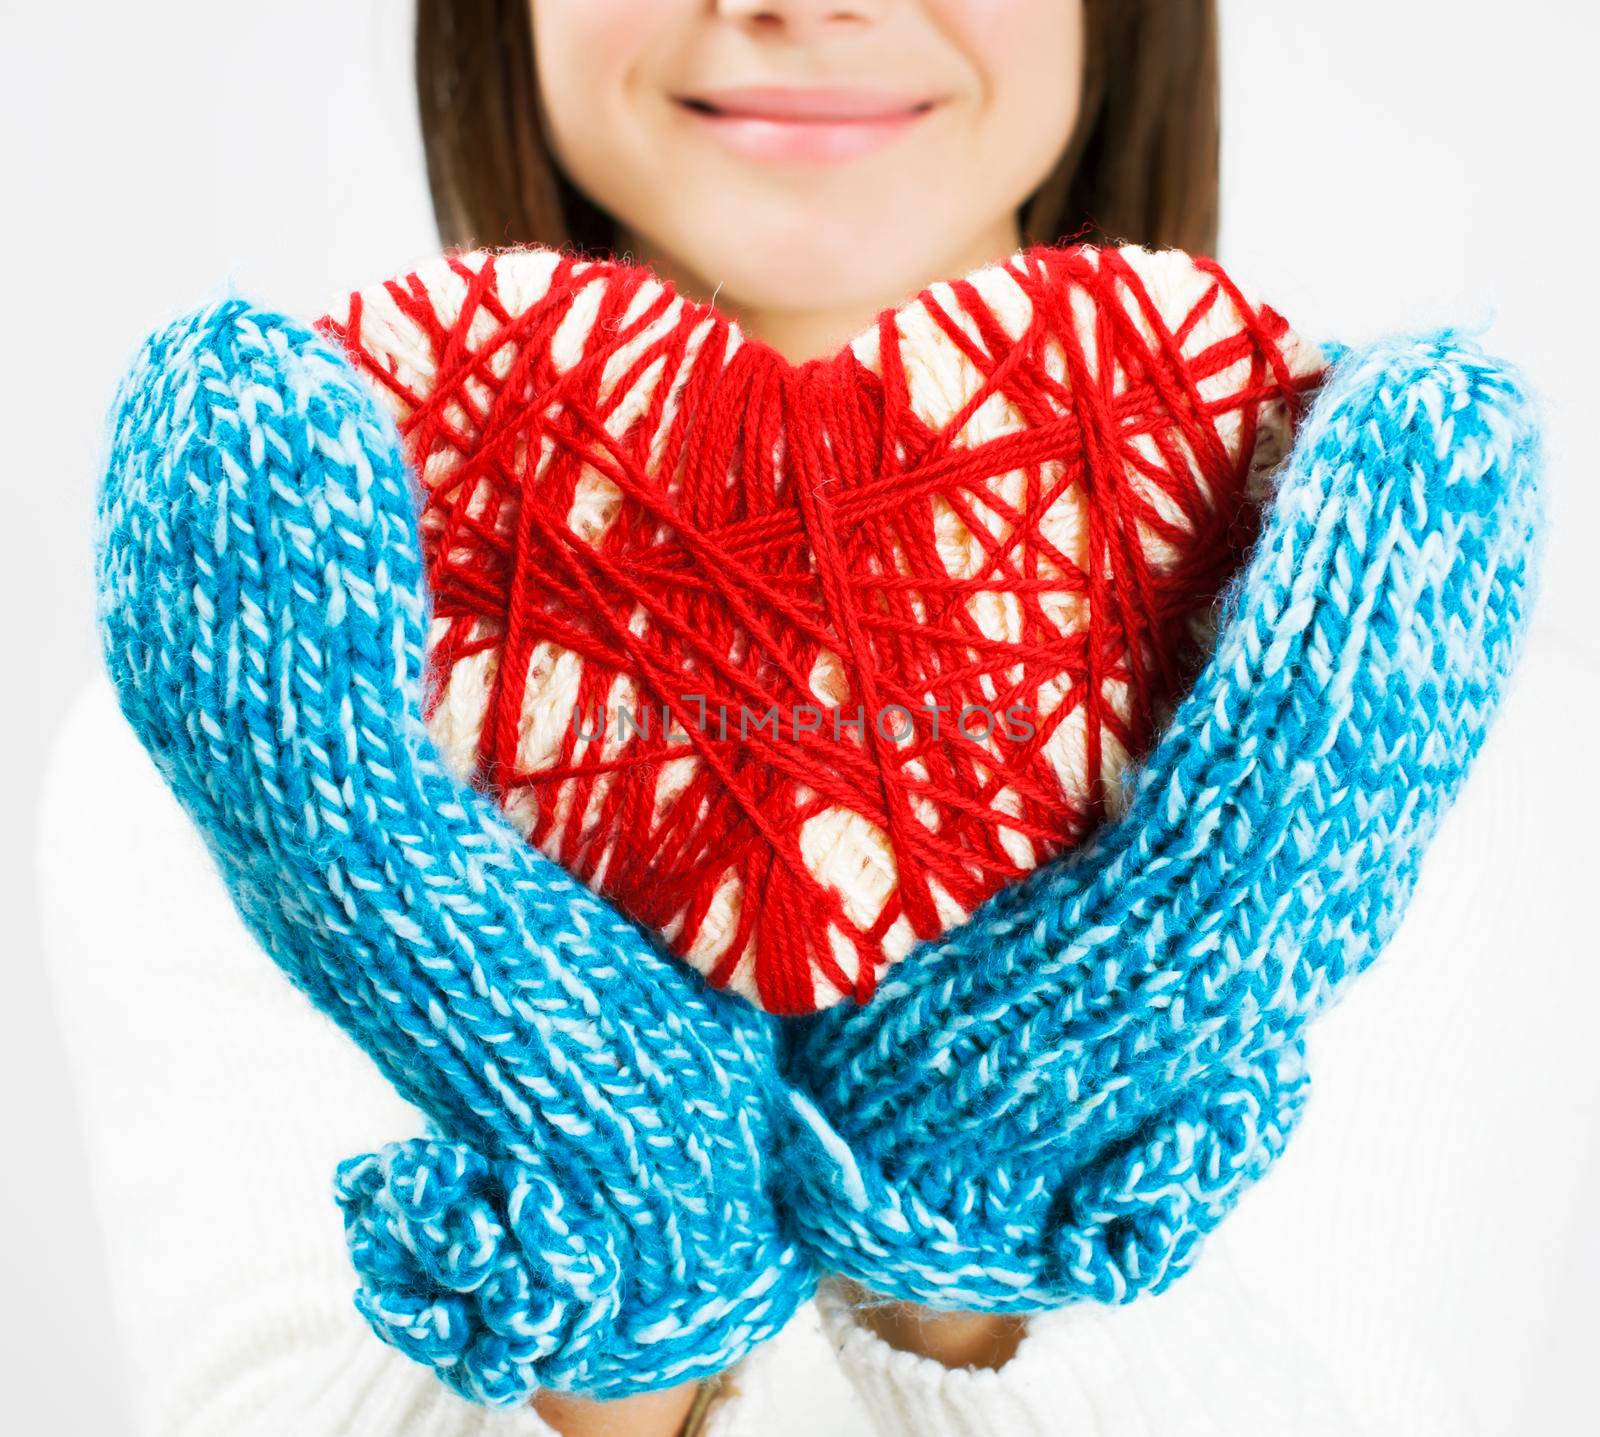 Girl hands in blue knitted mittens holding romantic red heart. With love. St. Valentine concept. Isolated.